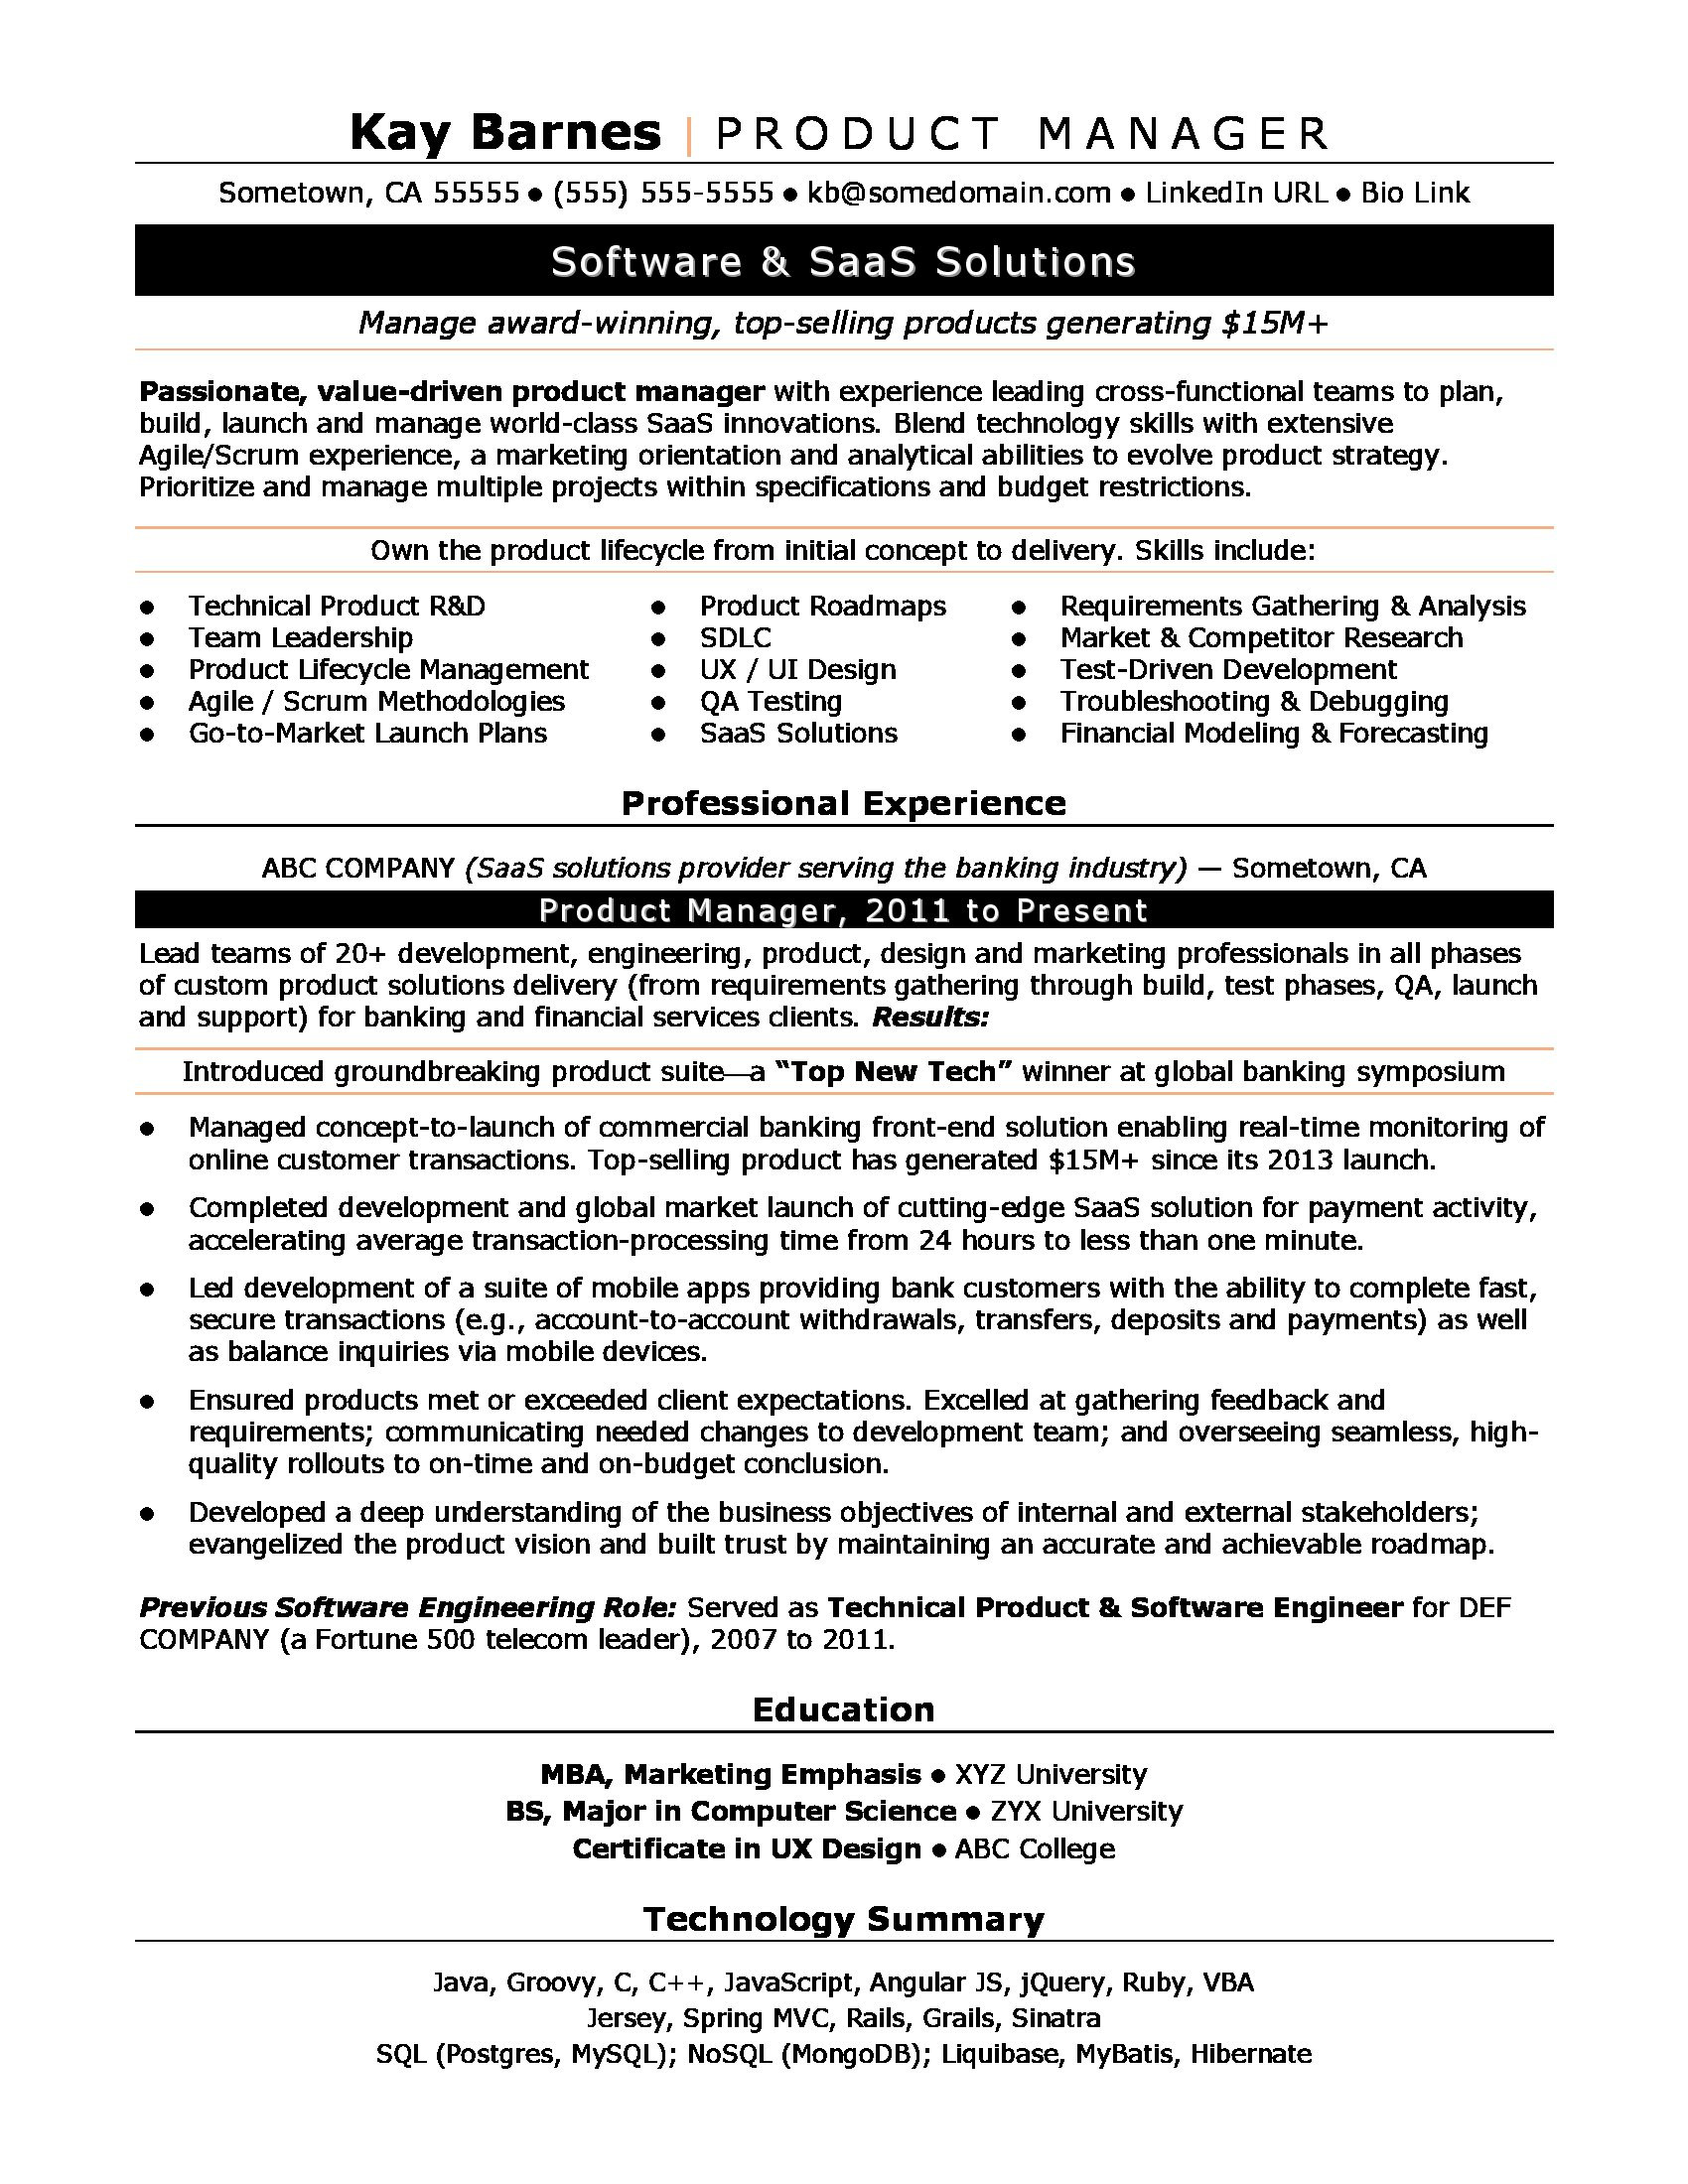 Sample Resume for Production Manager Post Product Manager Resume Sample Monster.com